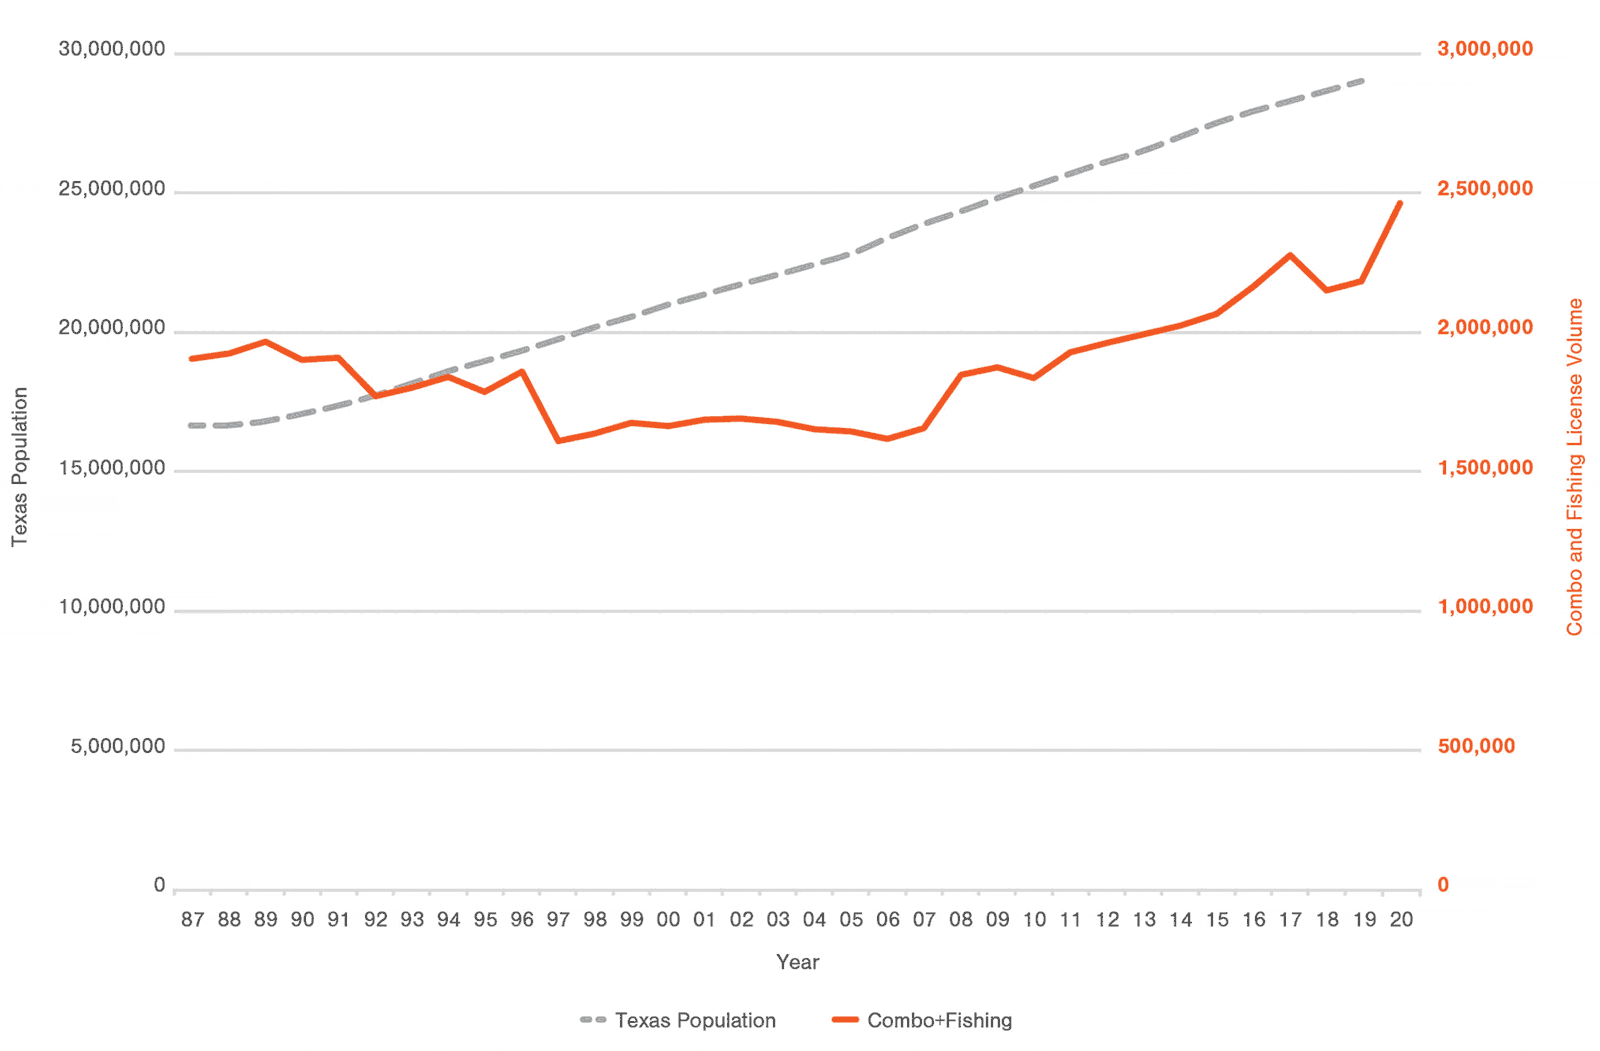 Line graph comparison of Texas Population to Combo and Fishing License Volume. Starts at 16 million people and 1.8 million licenses in 1987; ends at 29 million people and 2.5 million licenses 2020.